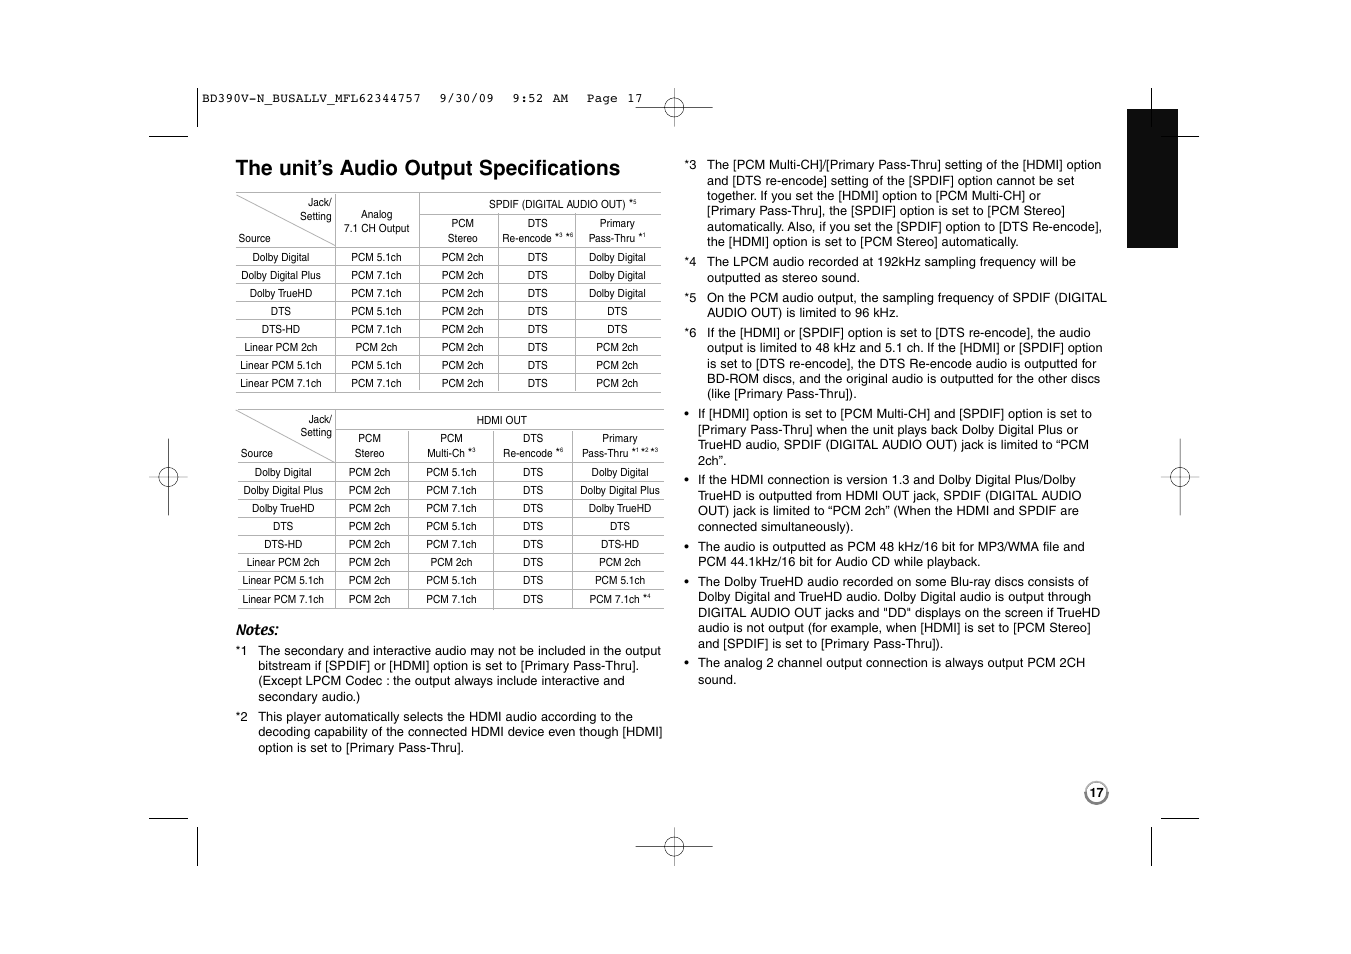 The unit’s audio output specifications | LG BD390 User Manual | Page 17 / 76